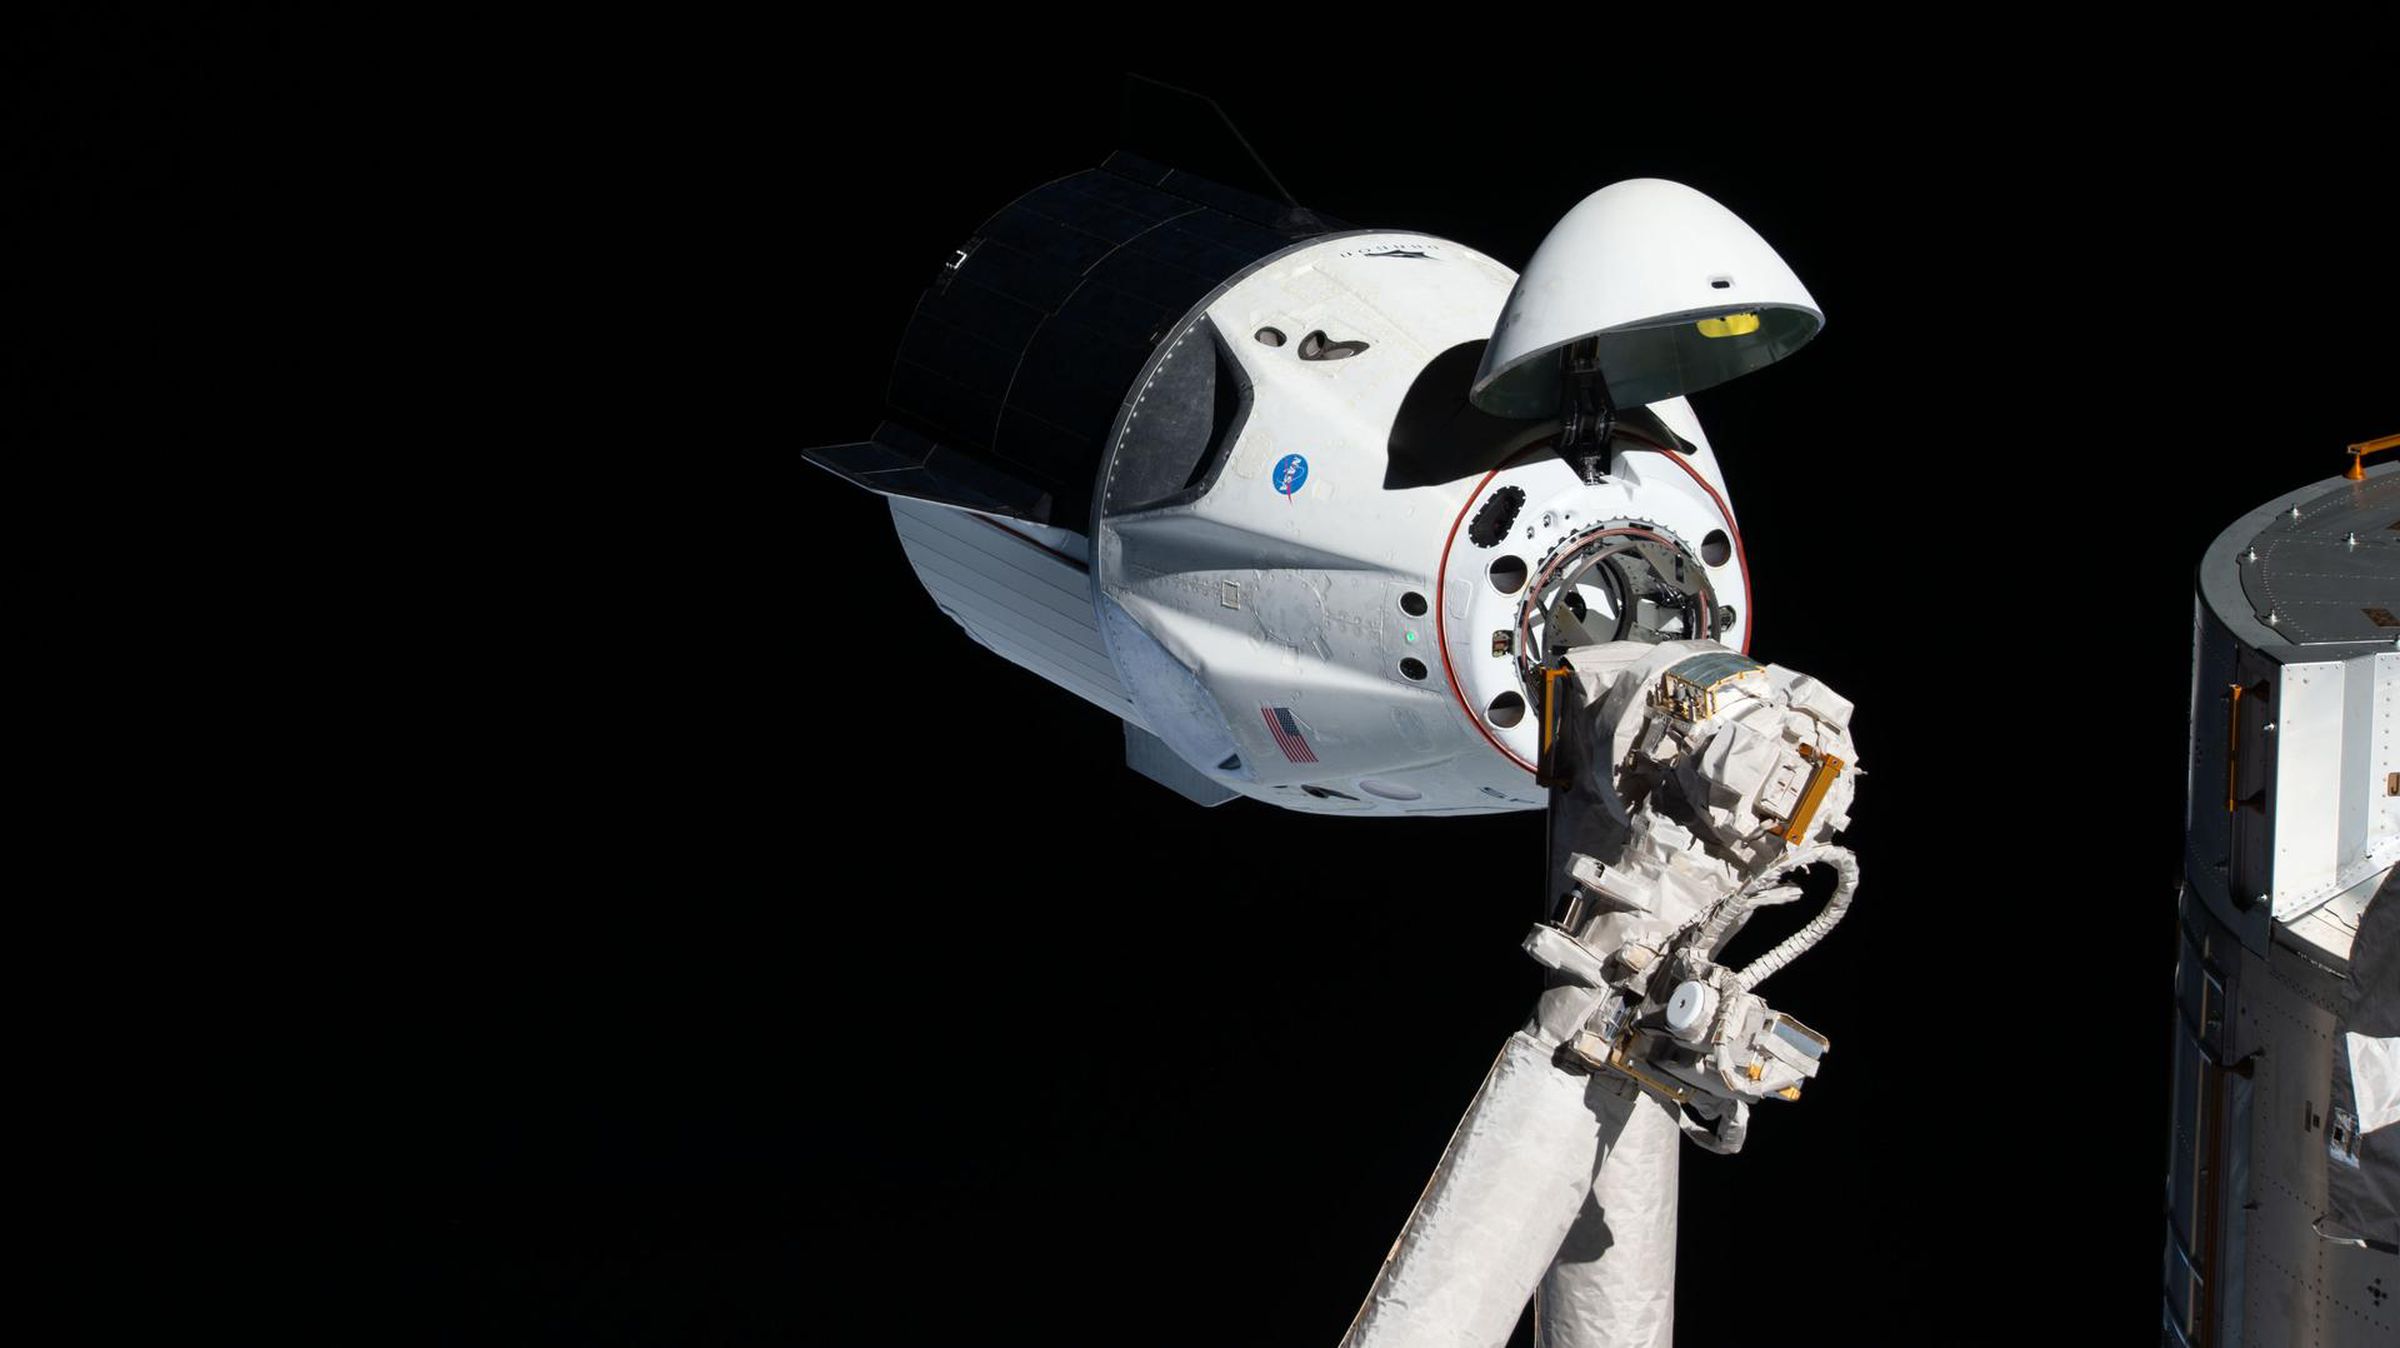 SpaceX’s uncrewed Crew Dragon in space, just before docking with the ISS